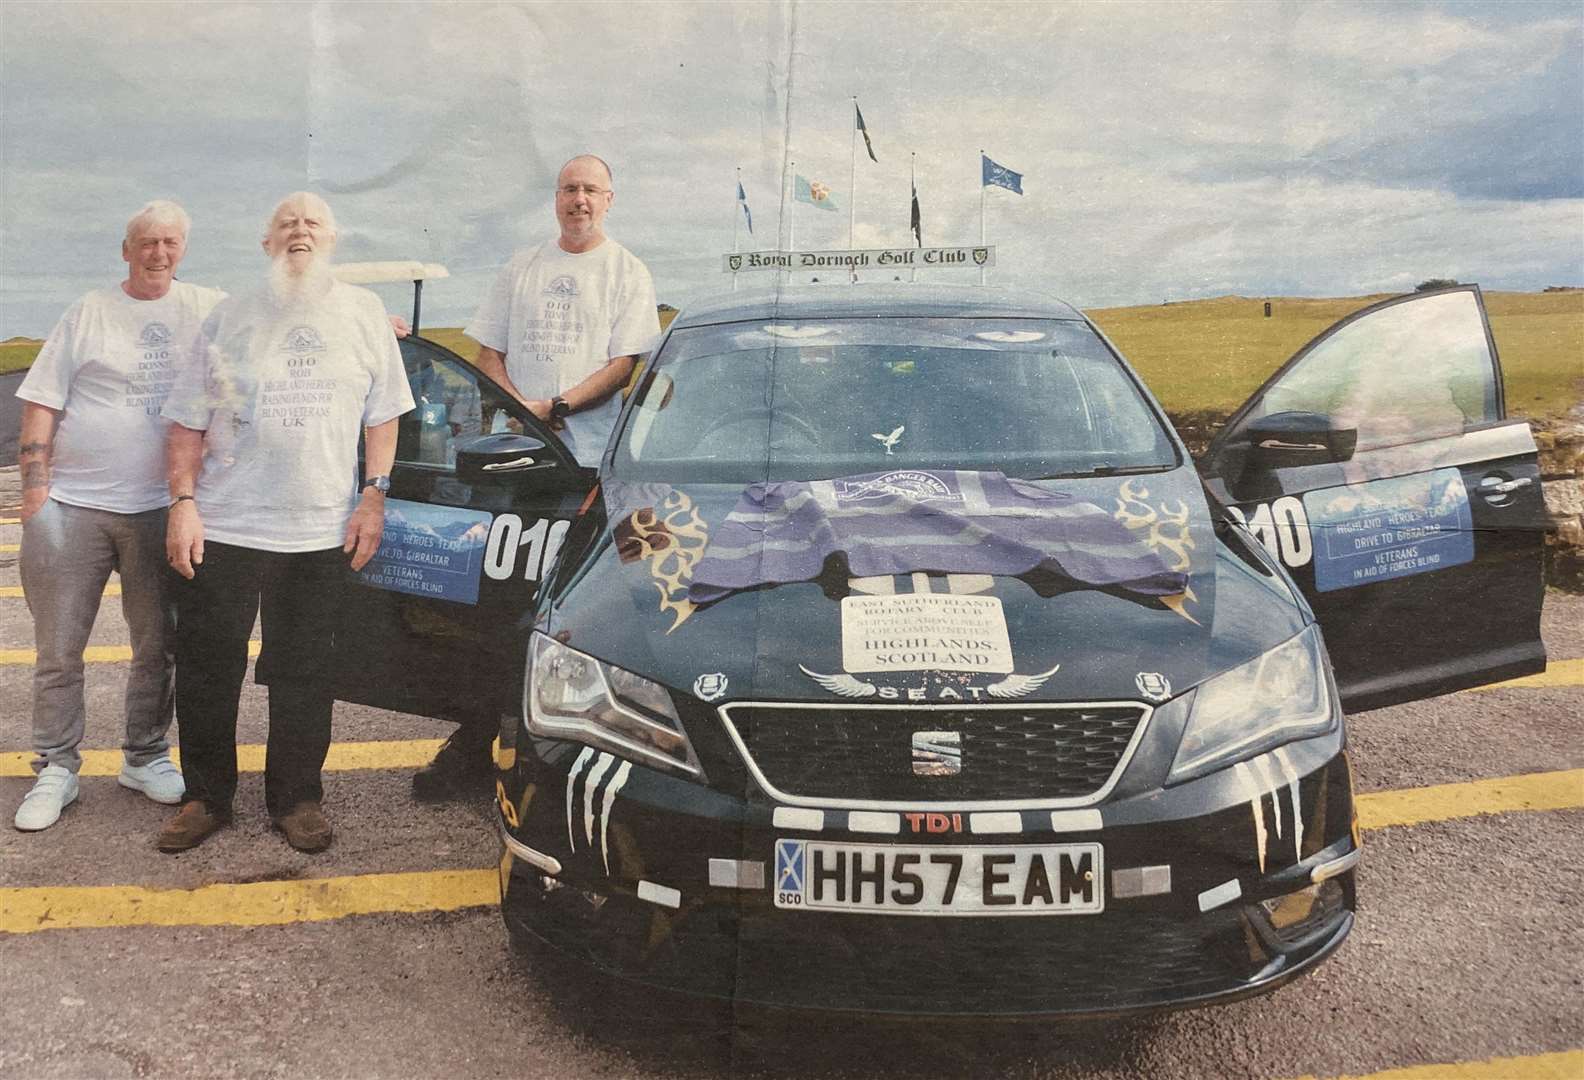 An adventure across Europe beckons for, from left, Donald McNeil, Rob Hope and Tony Gill.